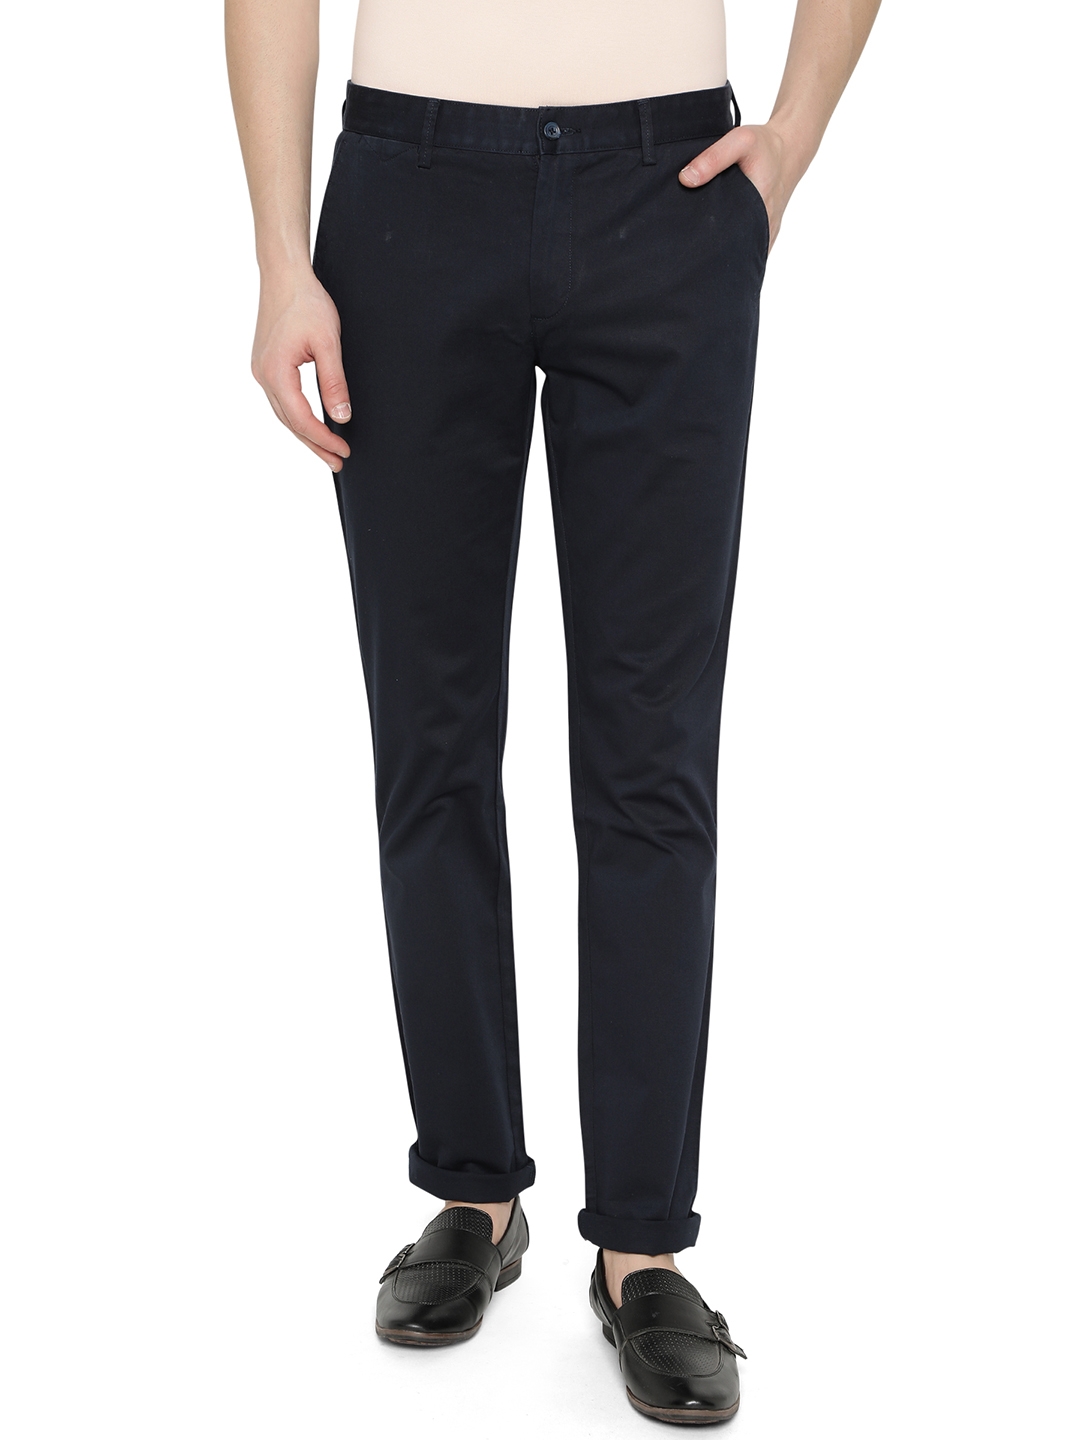 Greenfibre | Navy Blue Solid Super Slim Fit Casual Trouser | Greenfibre 0